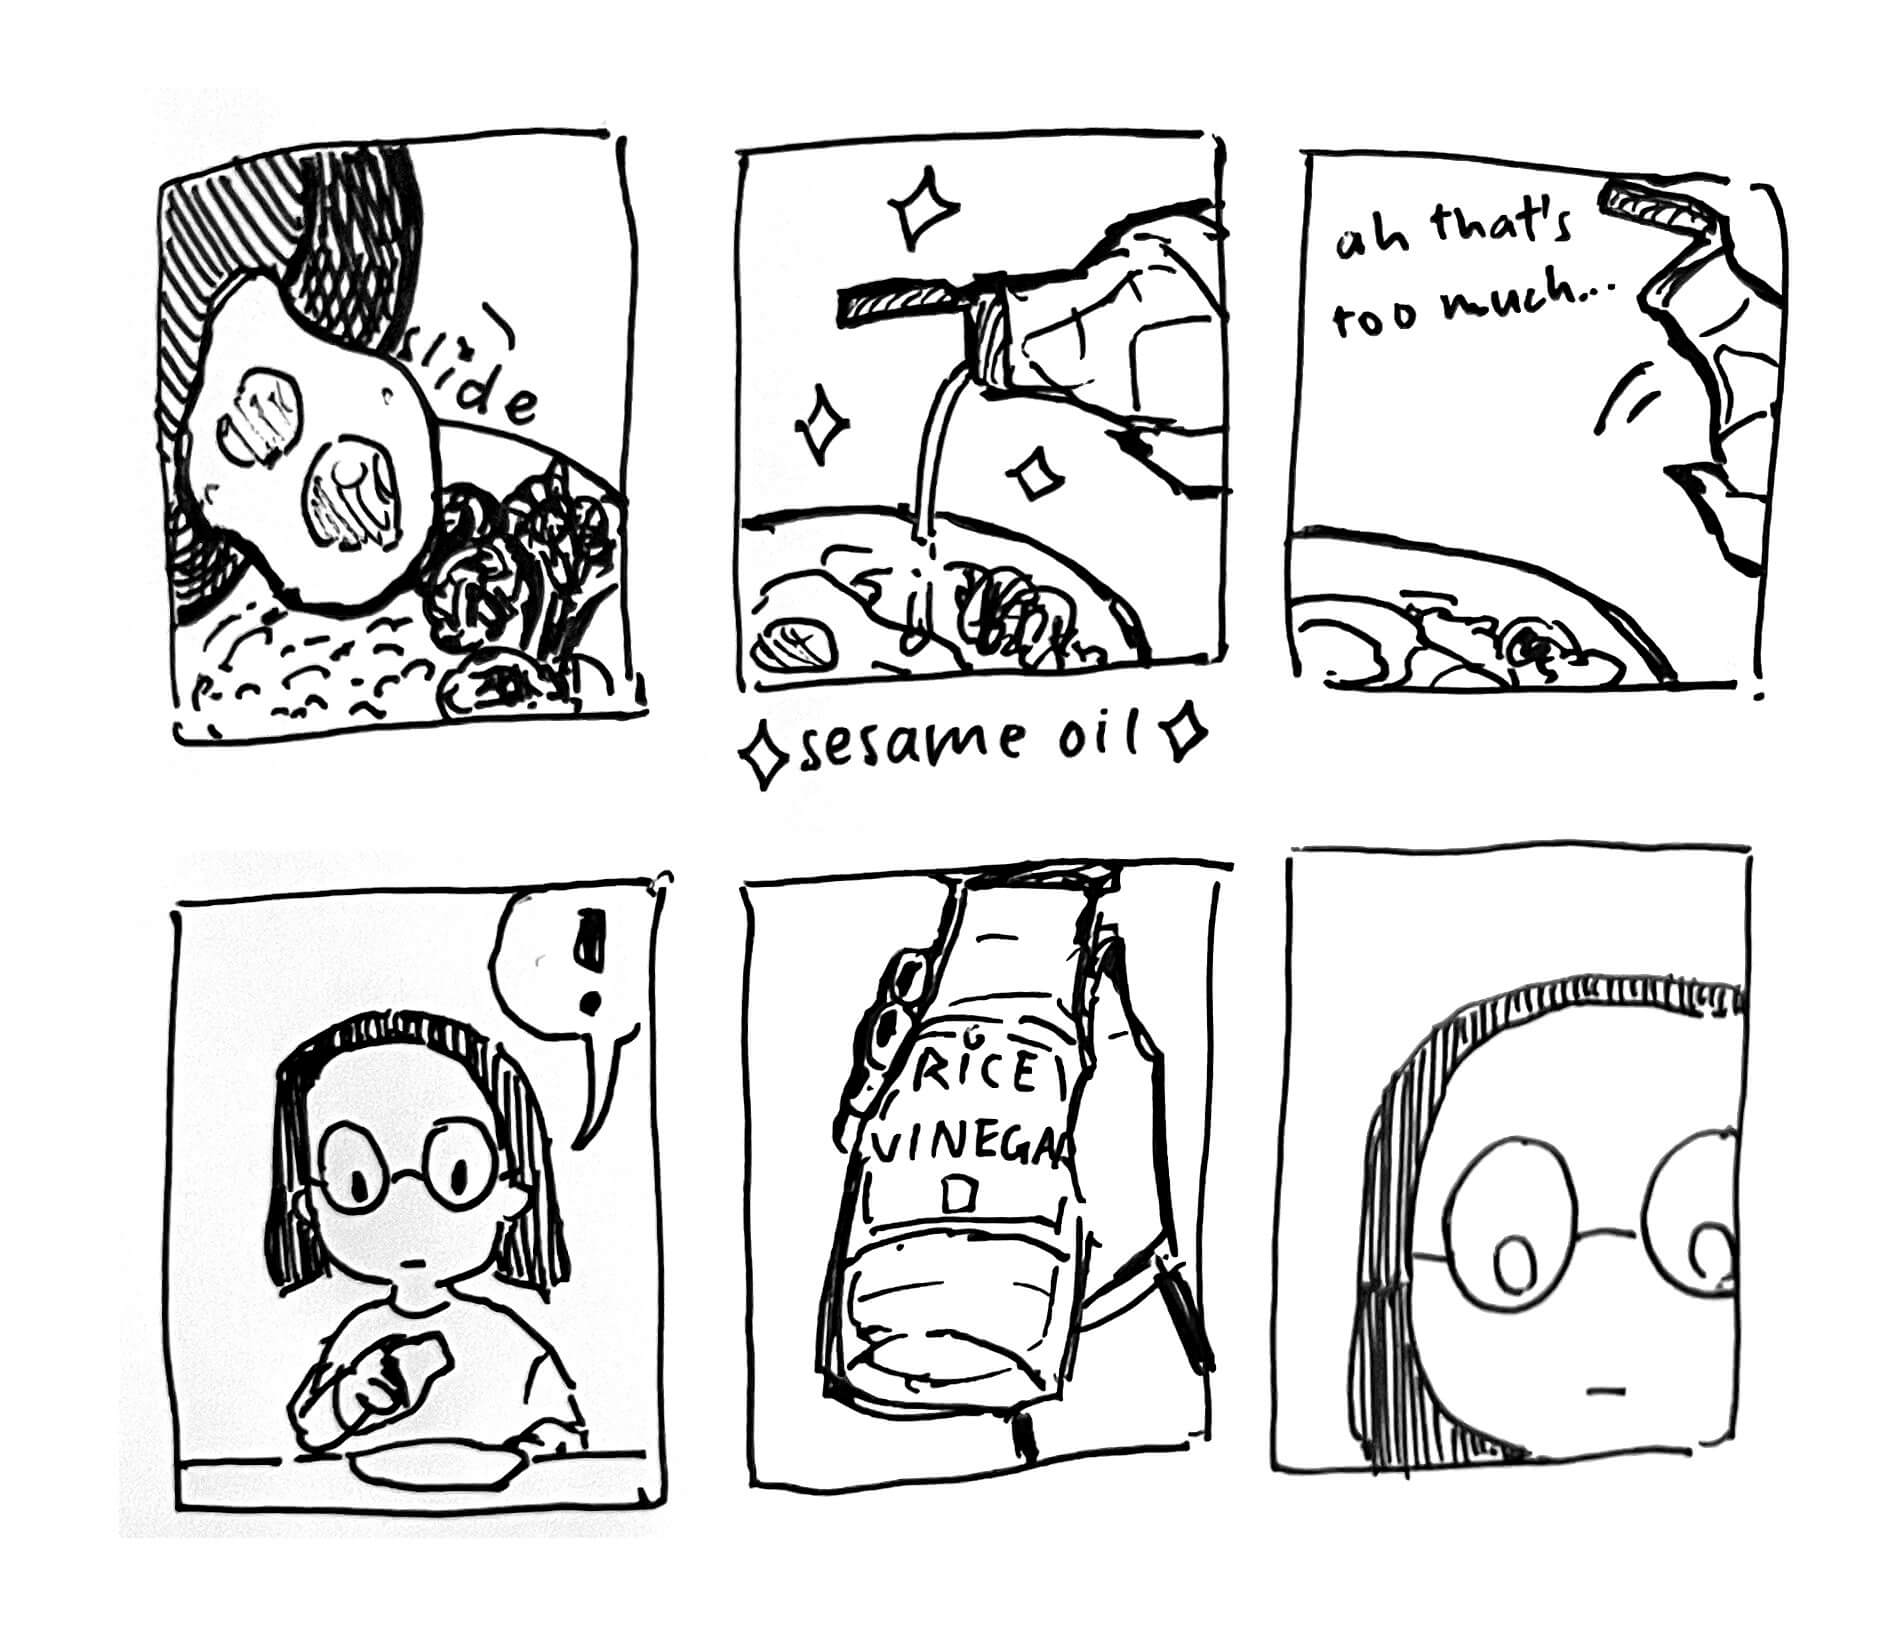 Six panel comic: 1. Sliding fried eggs onto a bowl of rice. 2. Excitedly pouring sesame oil on it. 3. Going ‘ah that’s too much’ and stopping. 4. I realize something. 5. I’m holding rice vinegar. 6. I simply. Stare at what I have done.